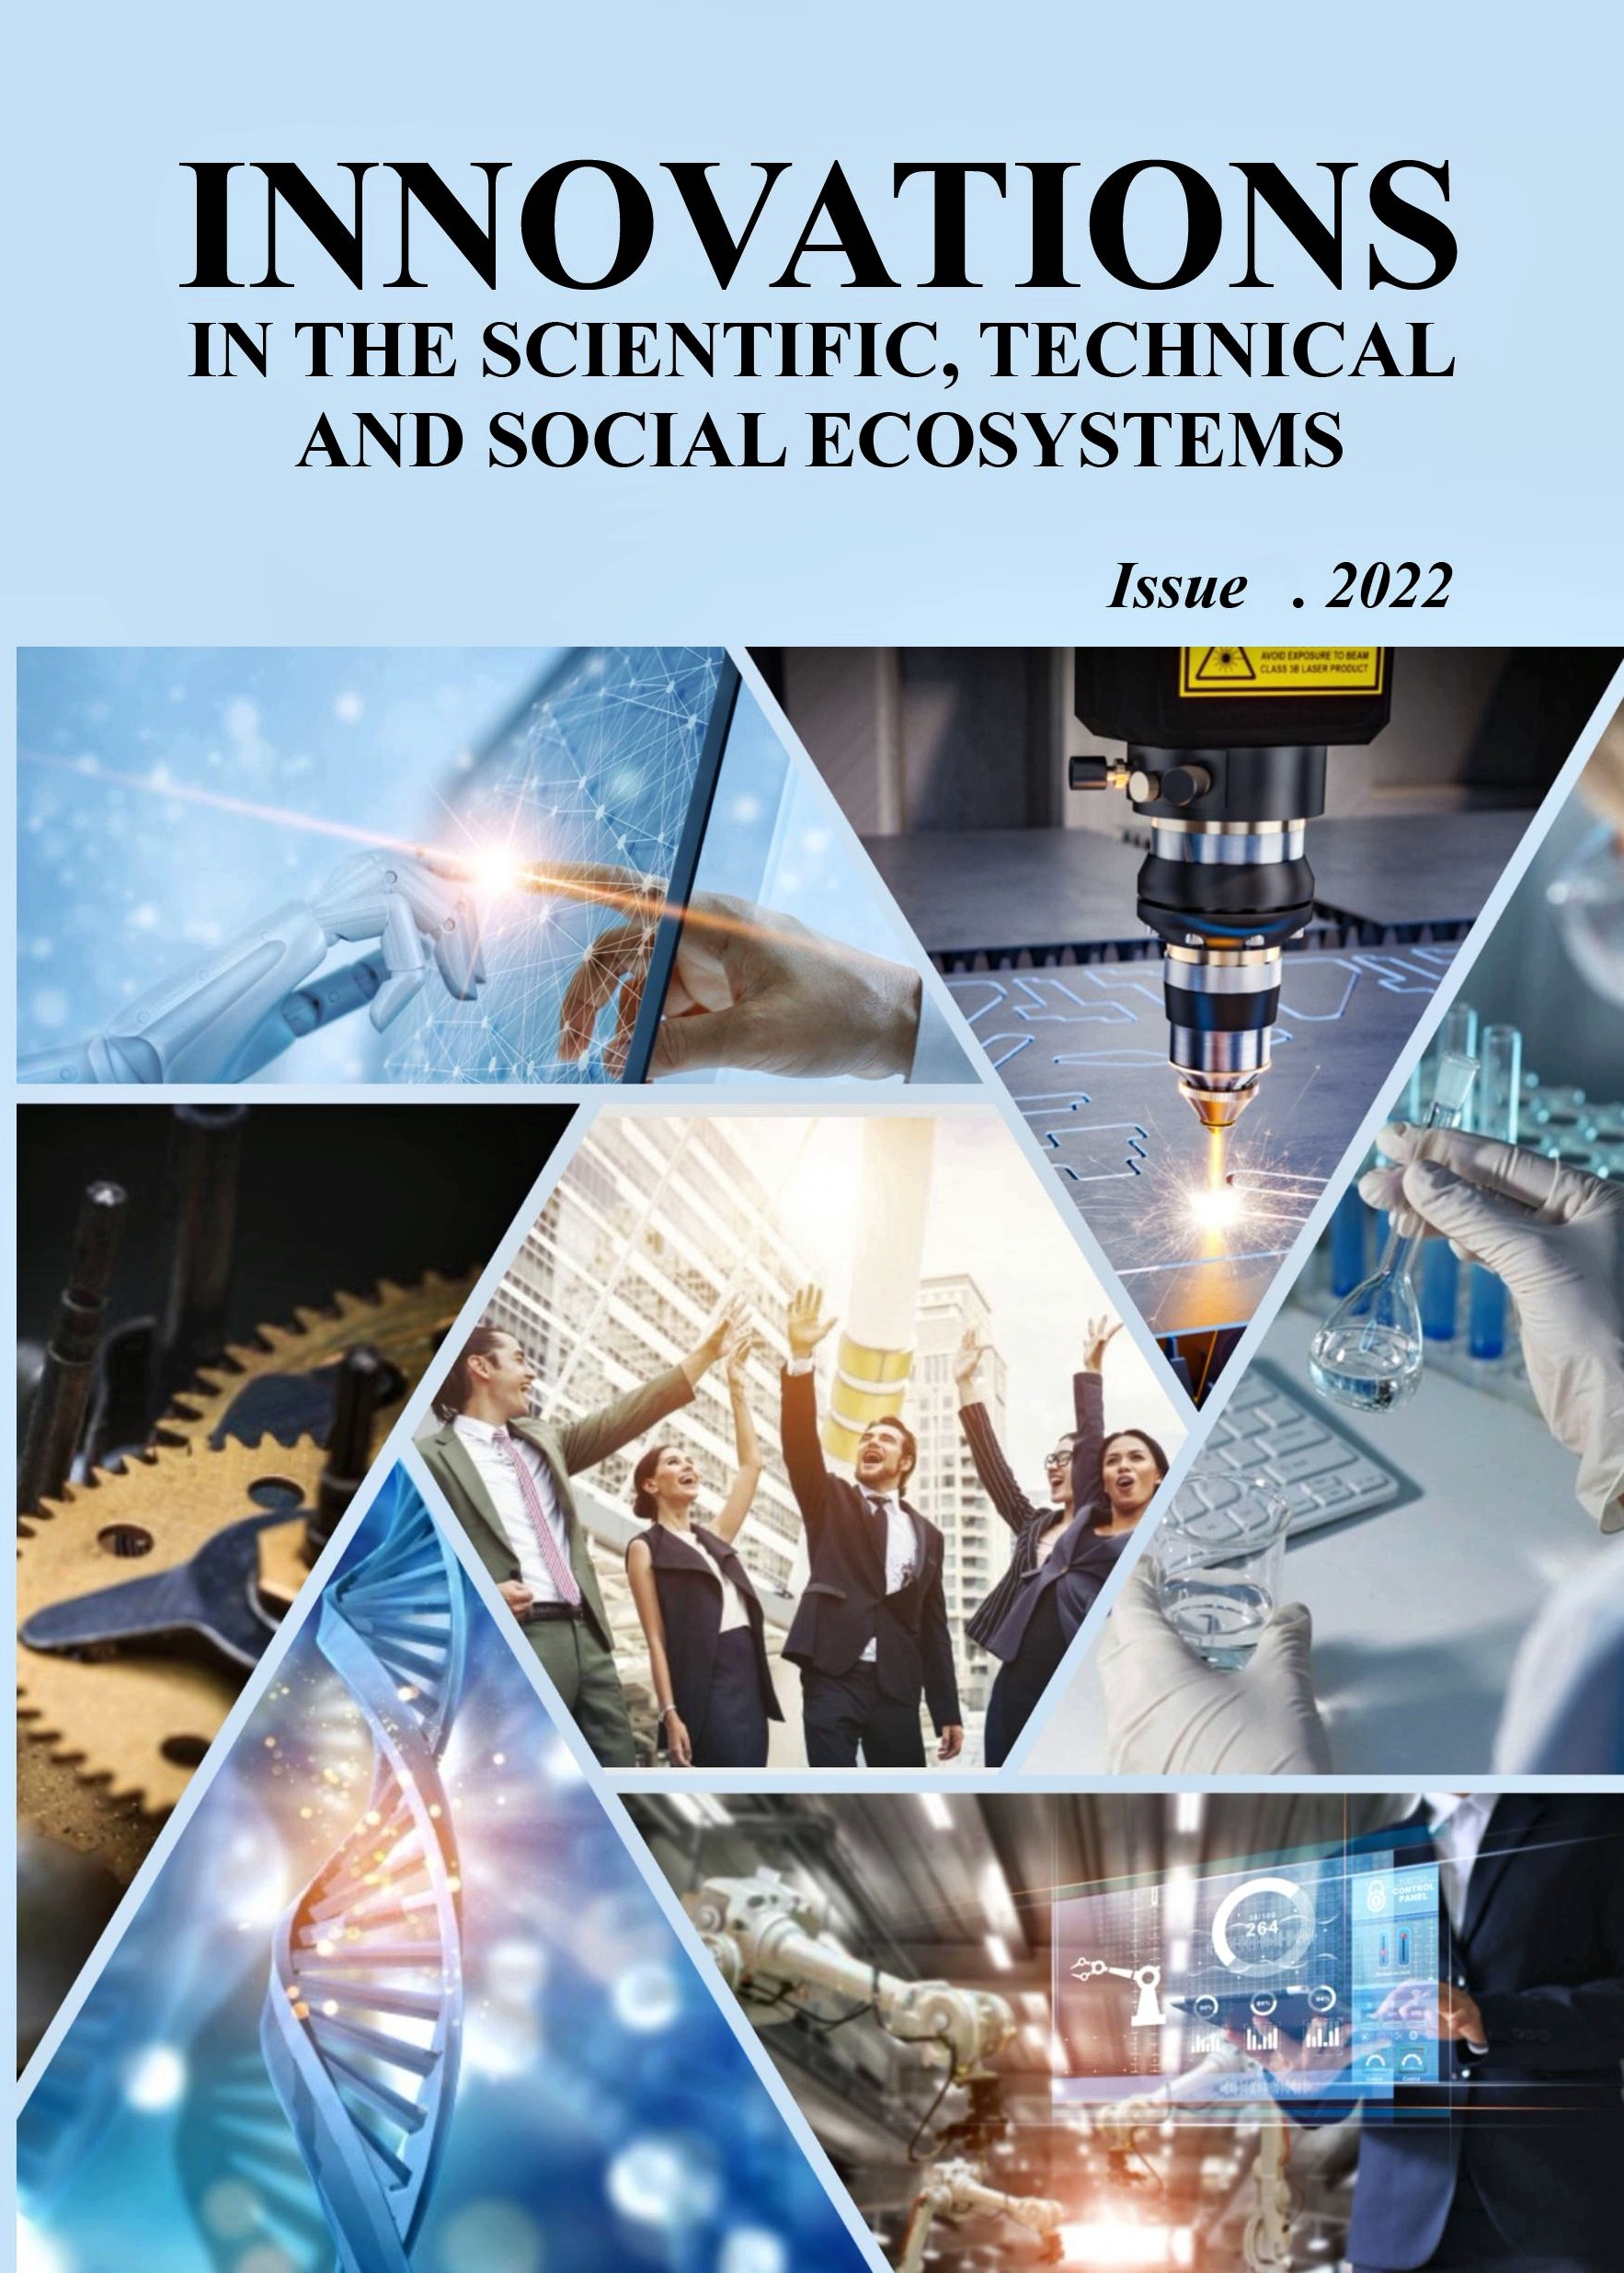 					View Vol. 1 No. 4 (2022): INNOVATIONS IN THE SCIENTIFIC, TECHNICAL AND SOCIAL ECOSYSTEMS
				